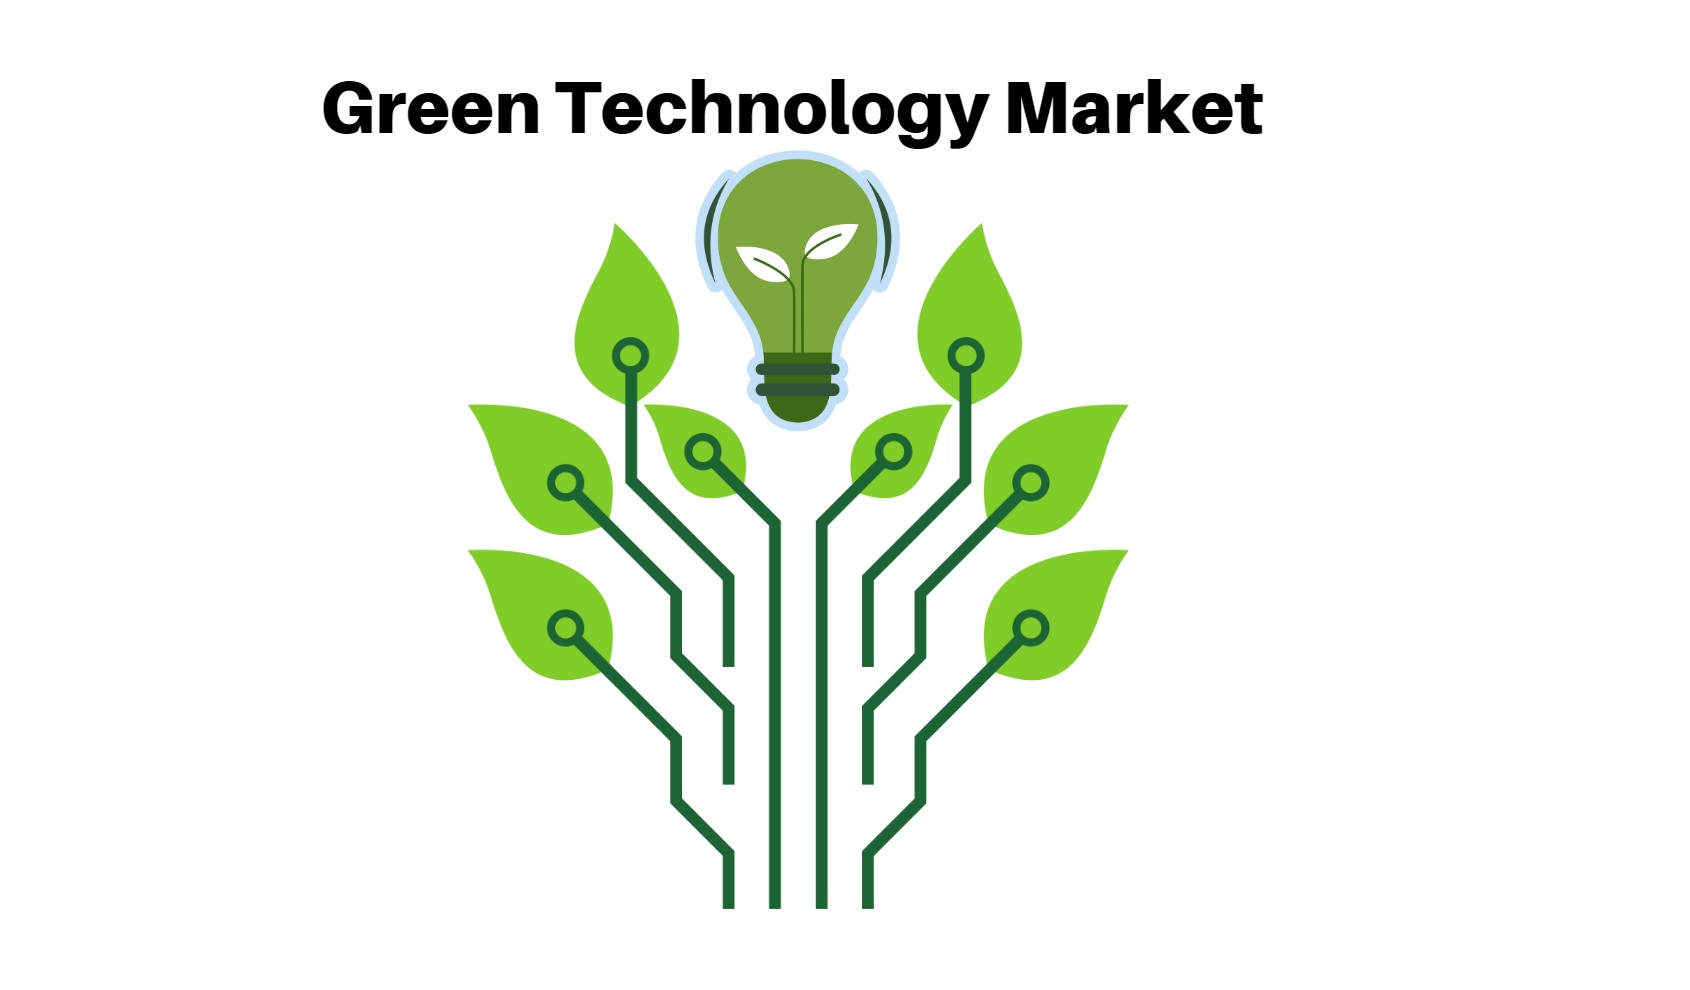 Green Technology Market is Predicted to Rise at a CAGR of 8.7% | Penetration and Outlook by 2032